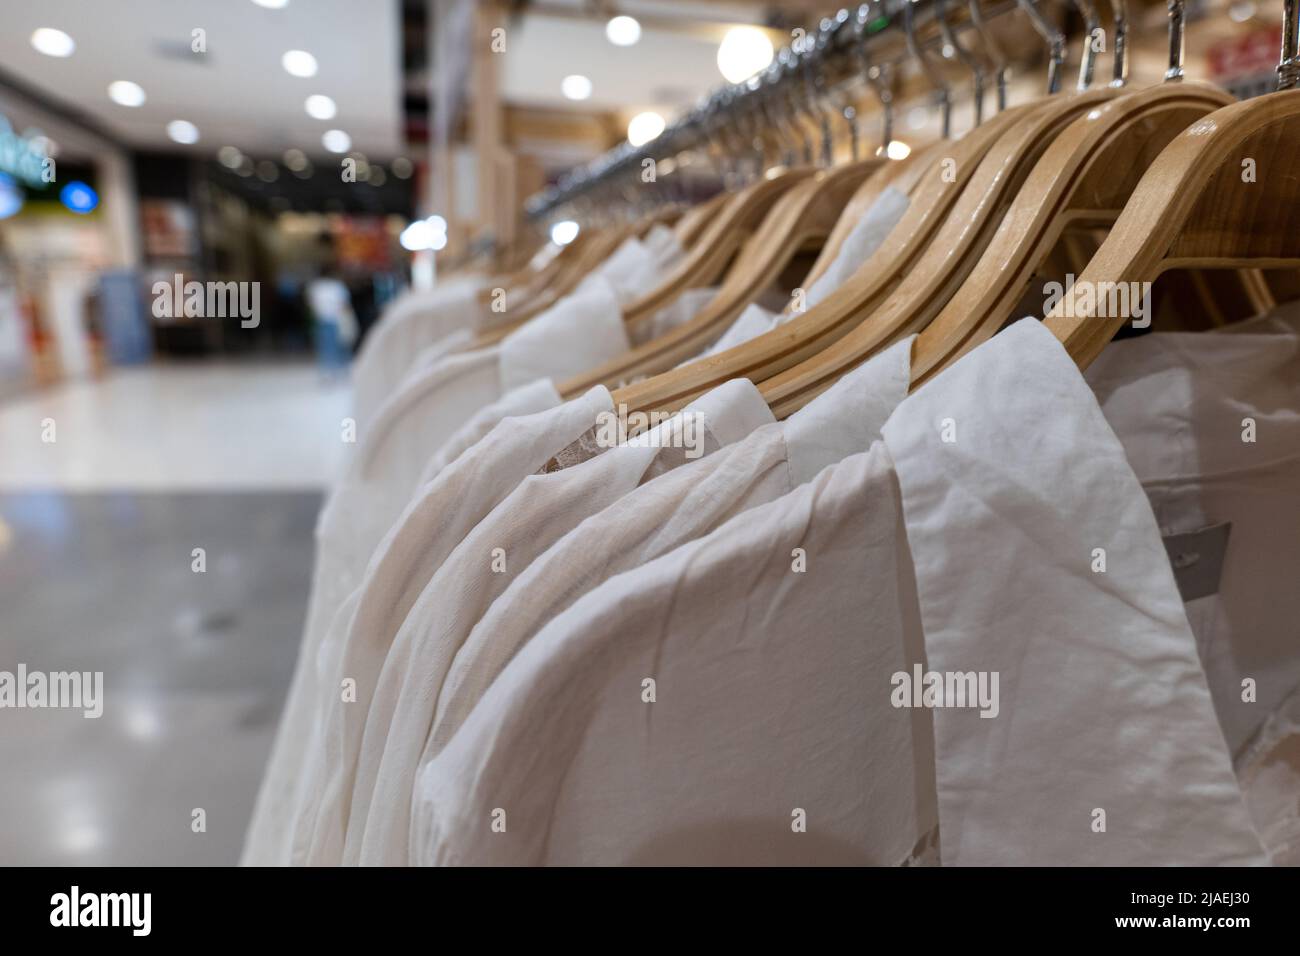 White clothes hanging on wood racks. Clothing for women hanging on hangers in shopping mall for sale. Stock Photo